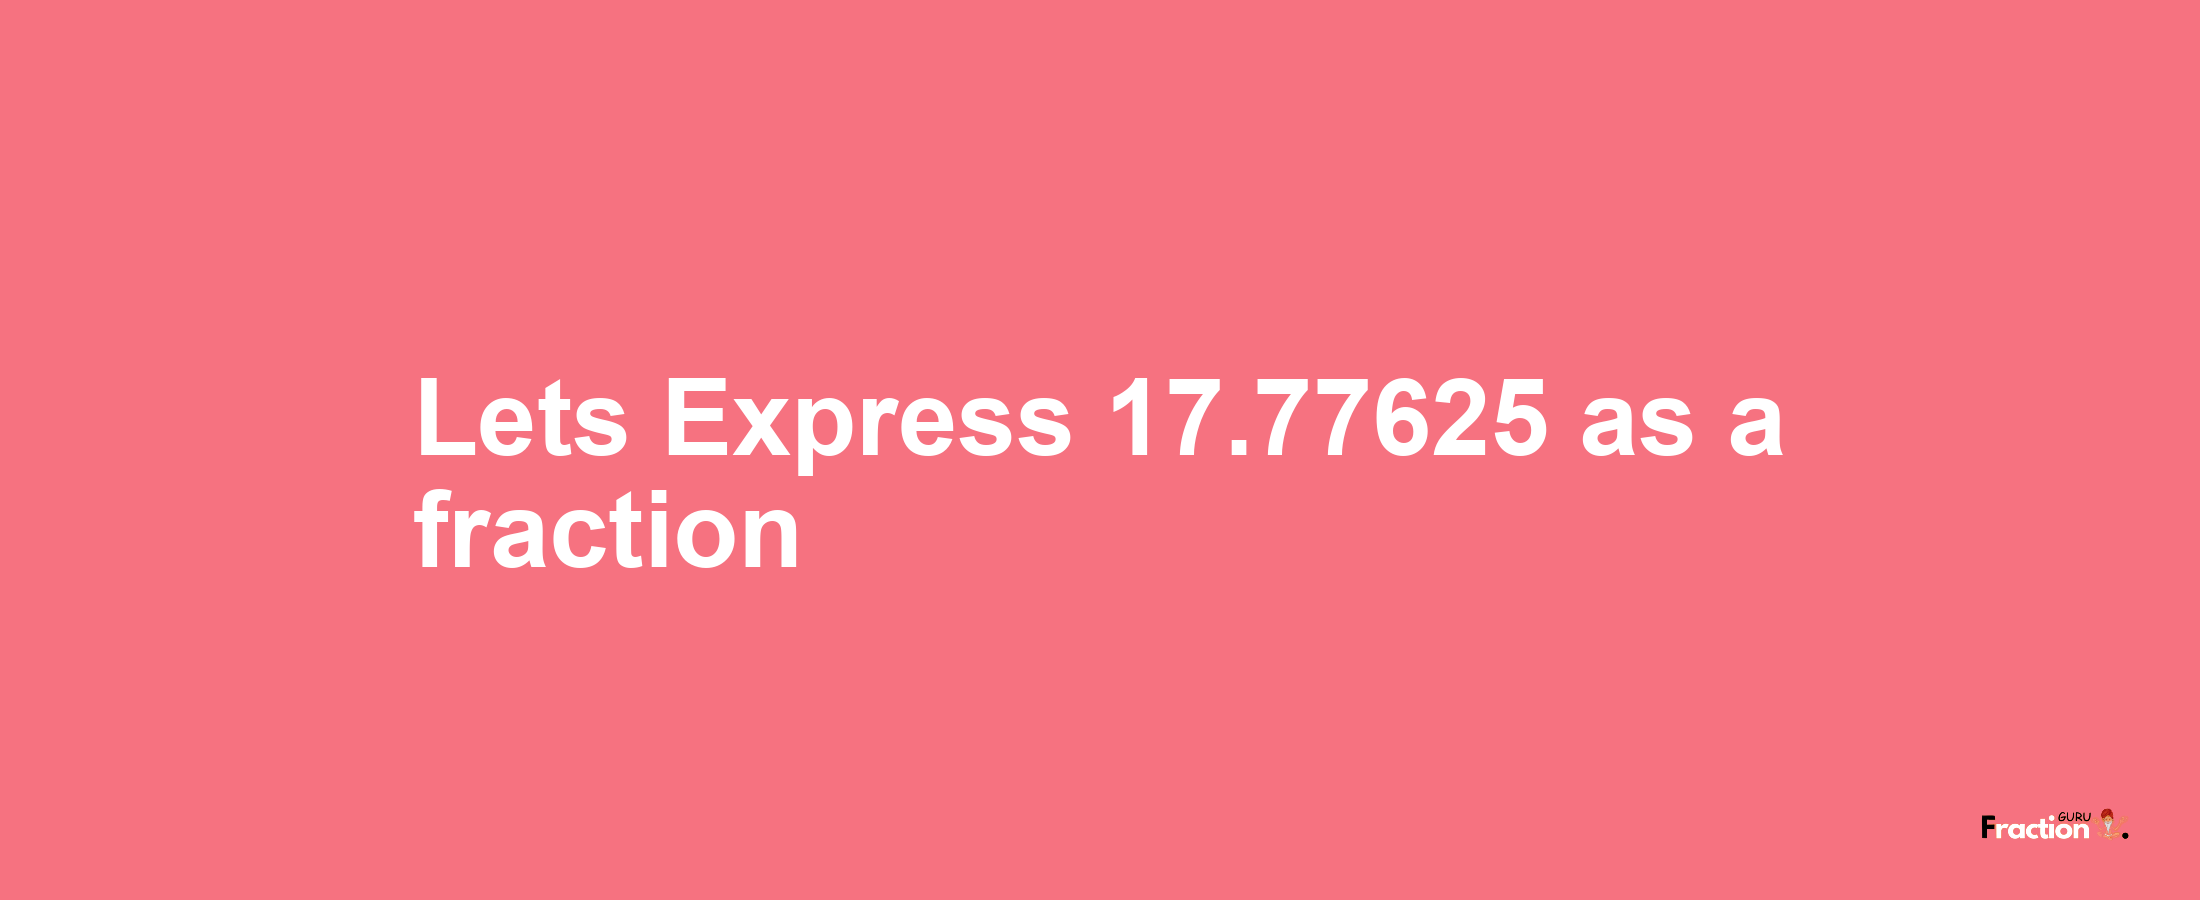 Lets Express 17.77625 as afraction